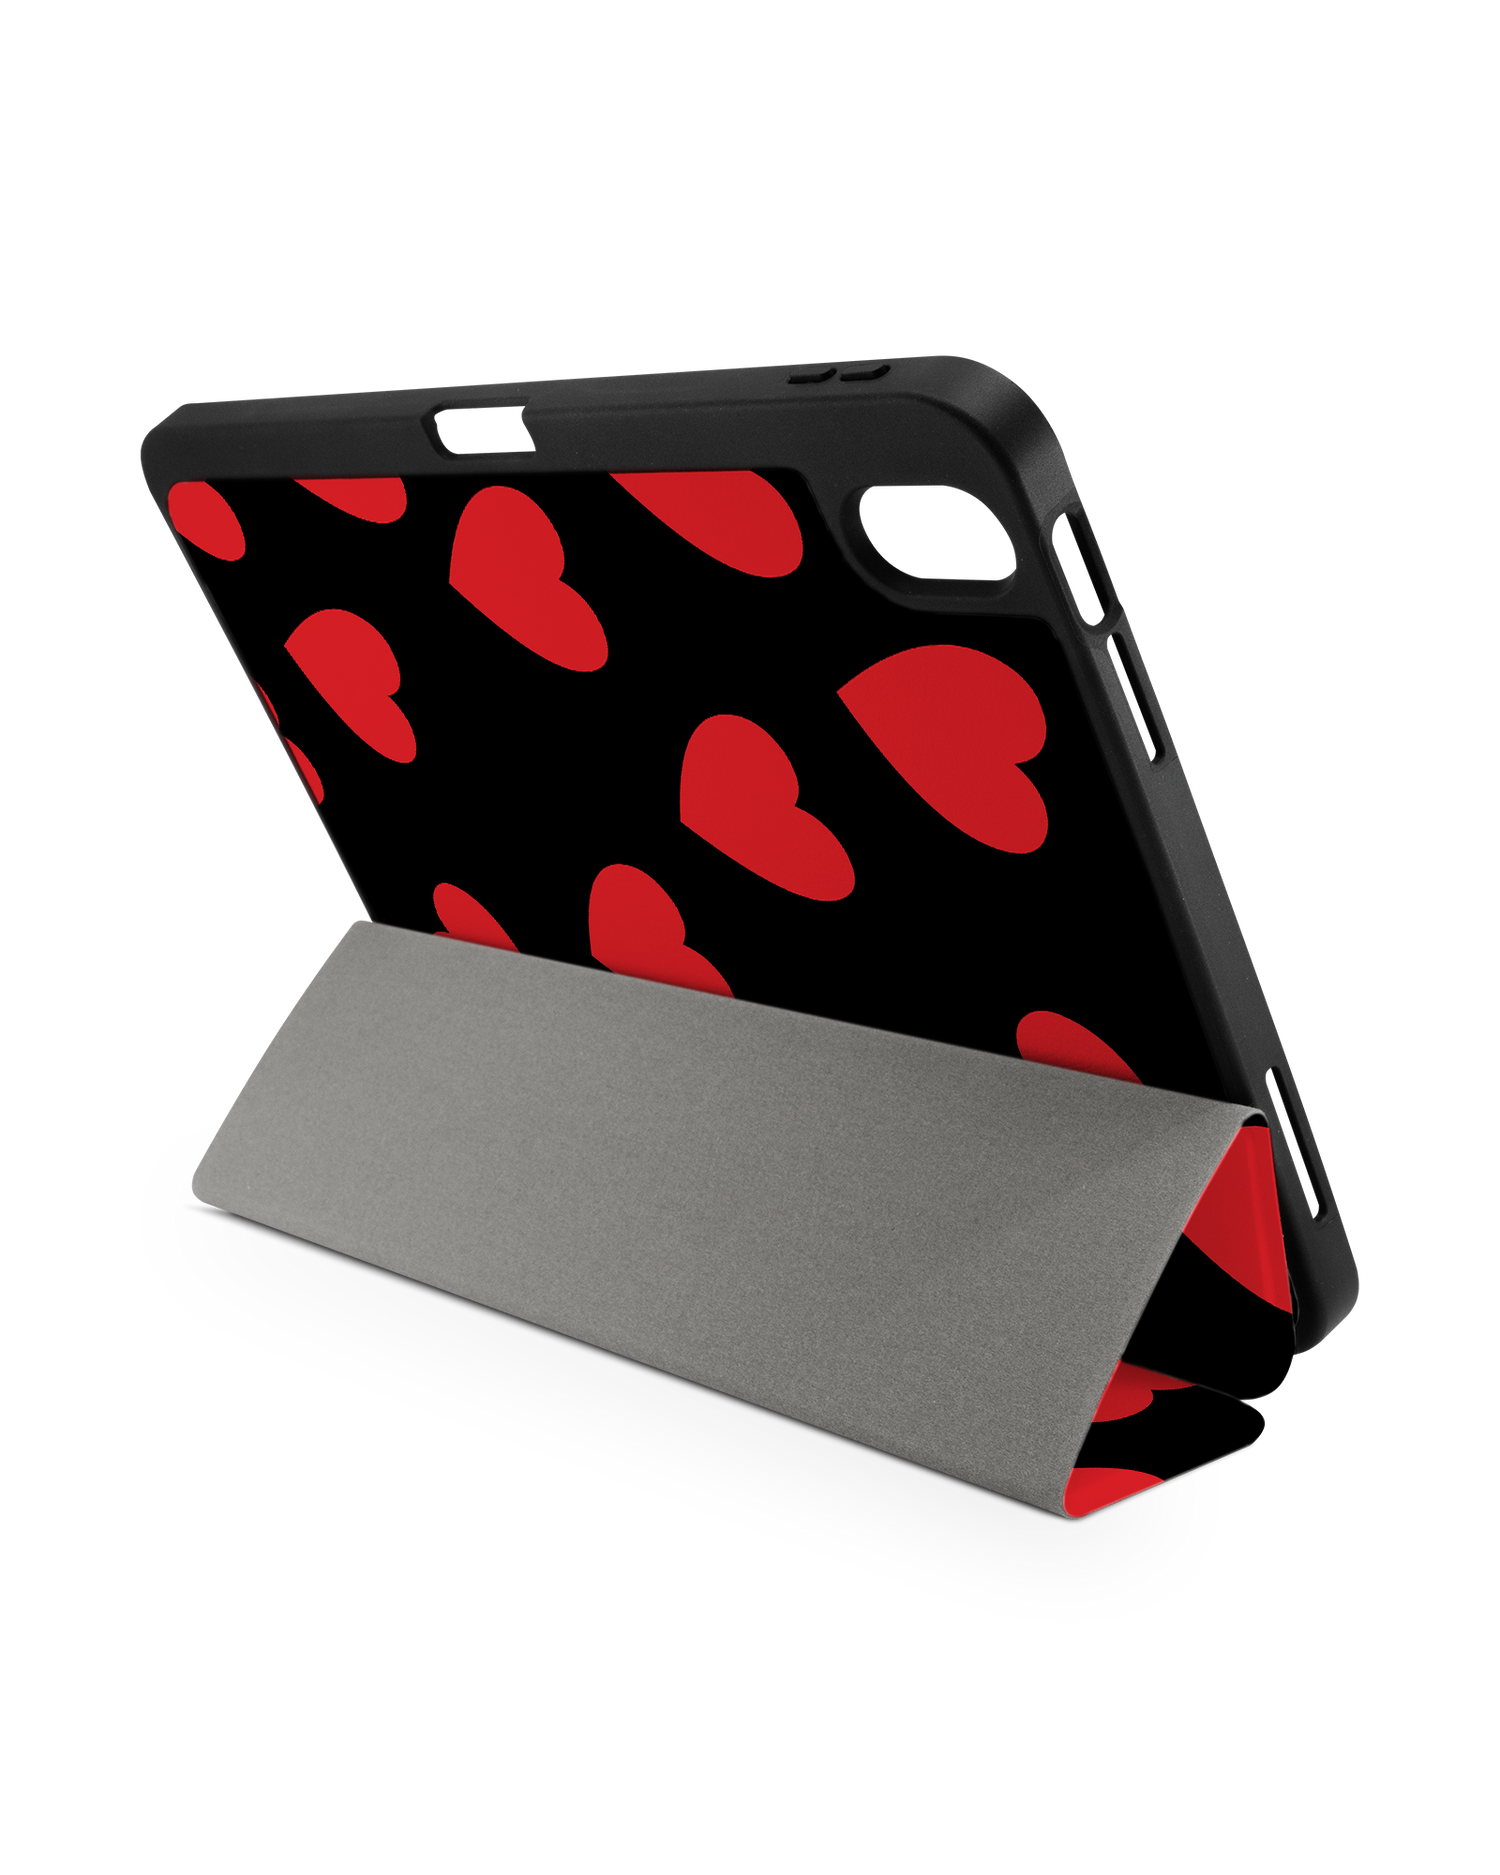 Repeating Hearts iPad Case with Pencil Holder for Apple iPad (10th Generation): Set up in landscape format (back view)